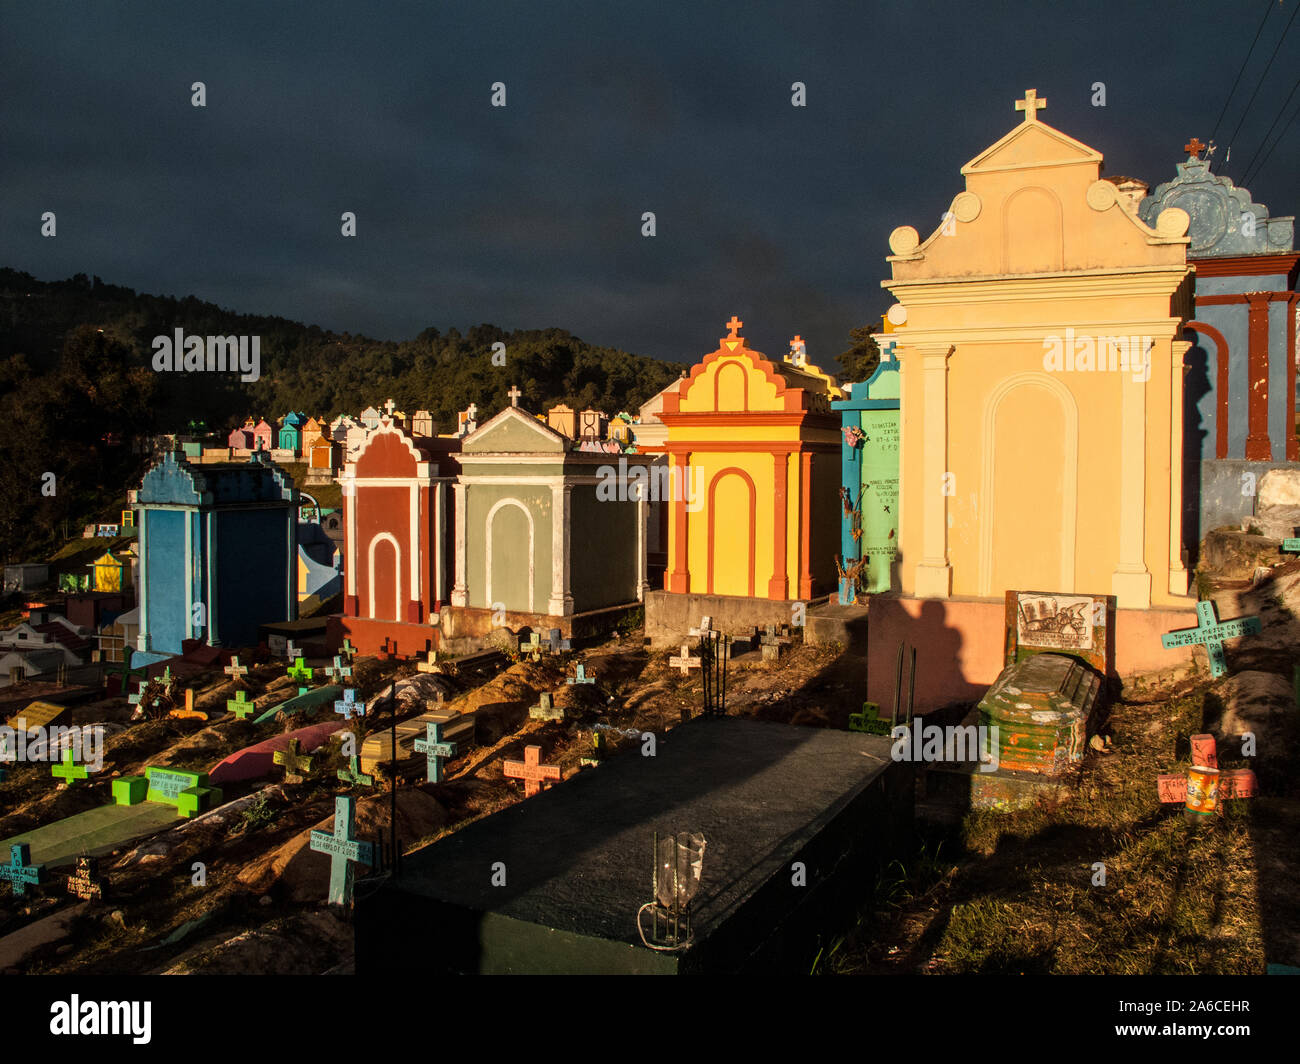 The cemetery in Chichicastenango, Guatemala early in the morning Stock Photo